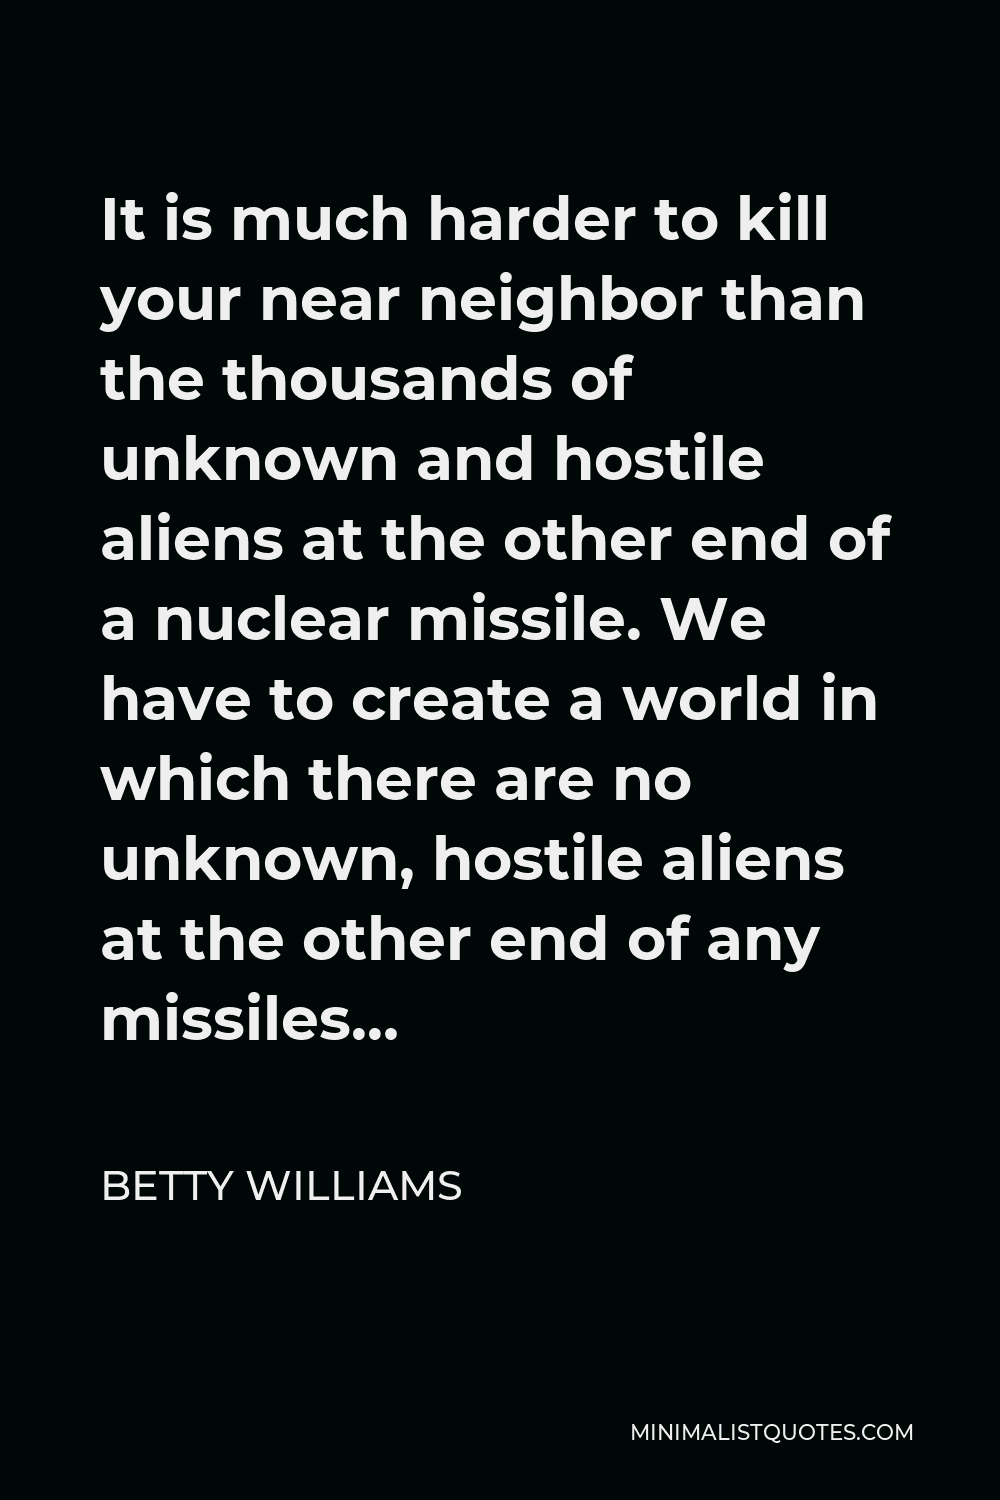 Betty Williams Quote - It is much harder to kill your near neighbor than the thousands of unknown and hostile aliens at the other end of a nuclear missile. We have to create a world in which there are no unknown, hostile aliens at the other end of any missiles…